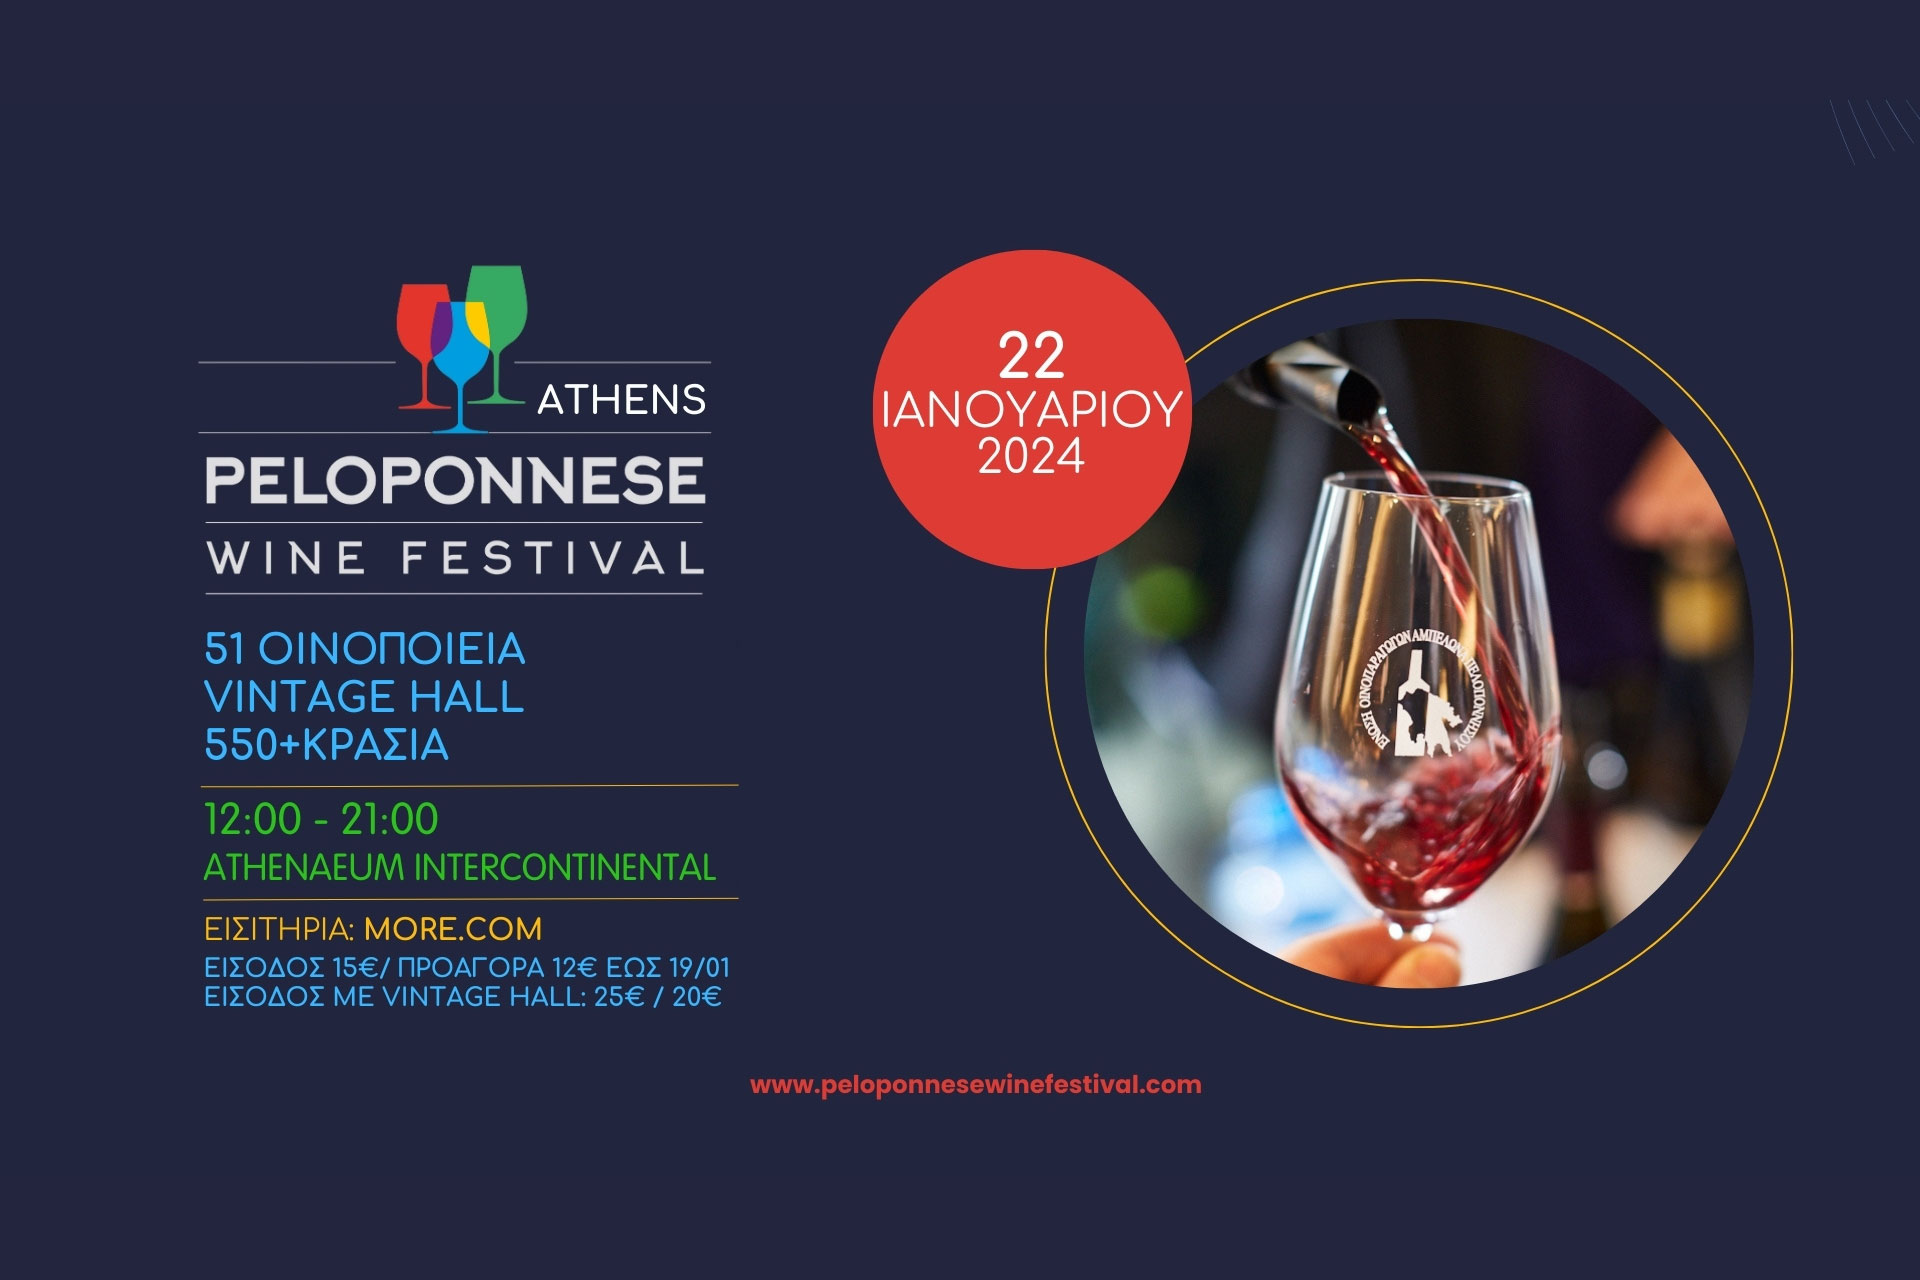 We participate in Peloponnese Wine Festival on 22 January 2024